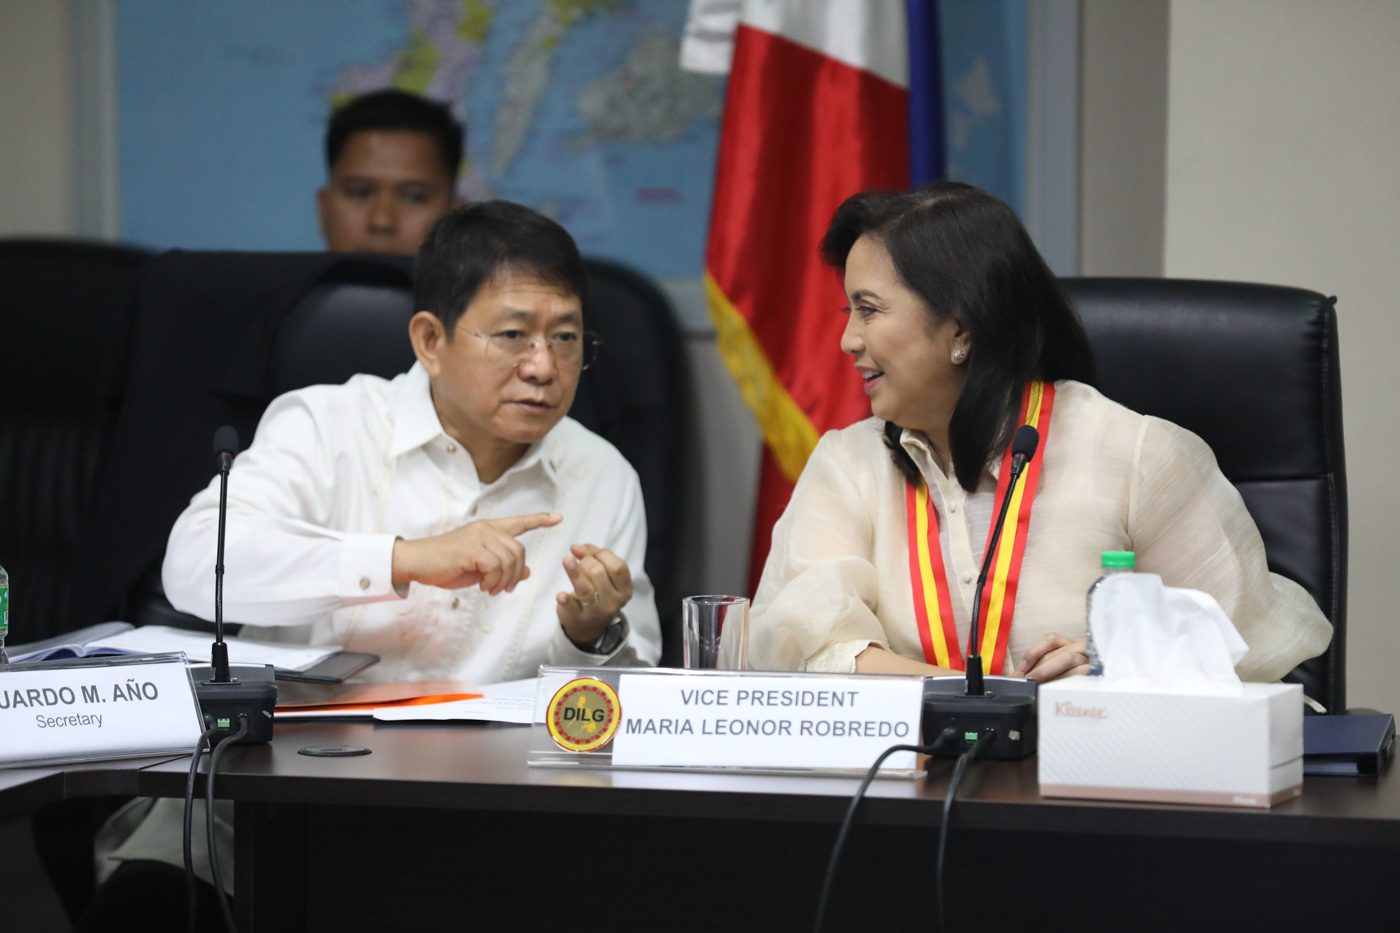 Robredo did not get anything confidential from us – DILG